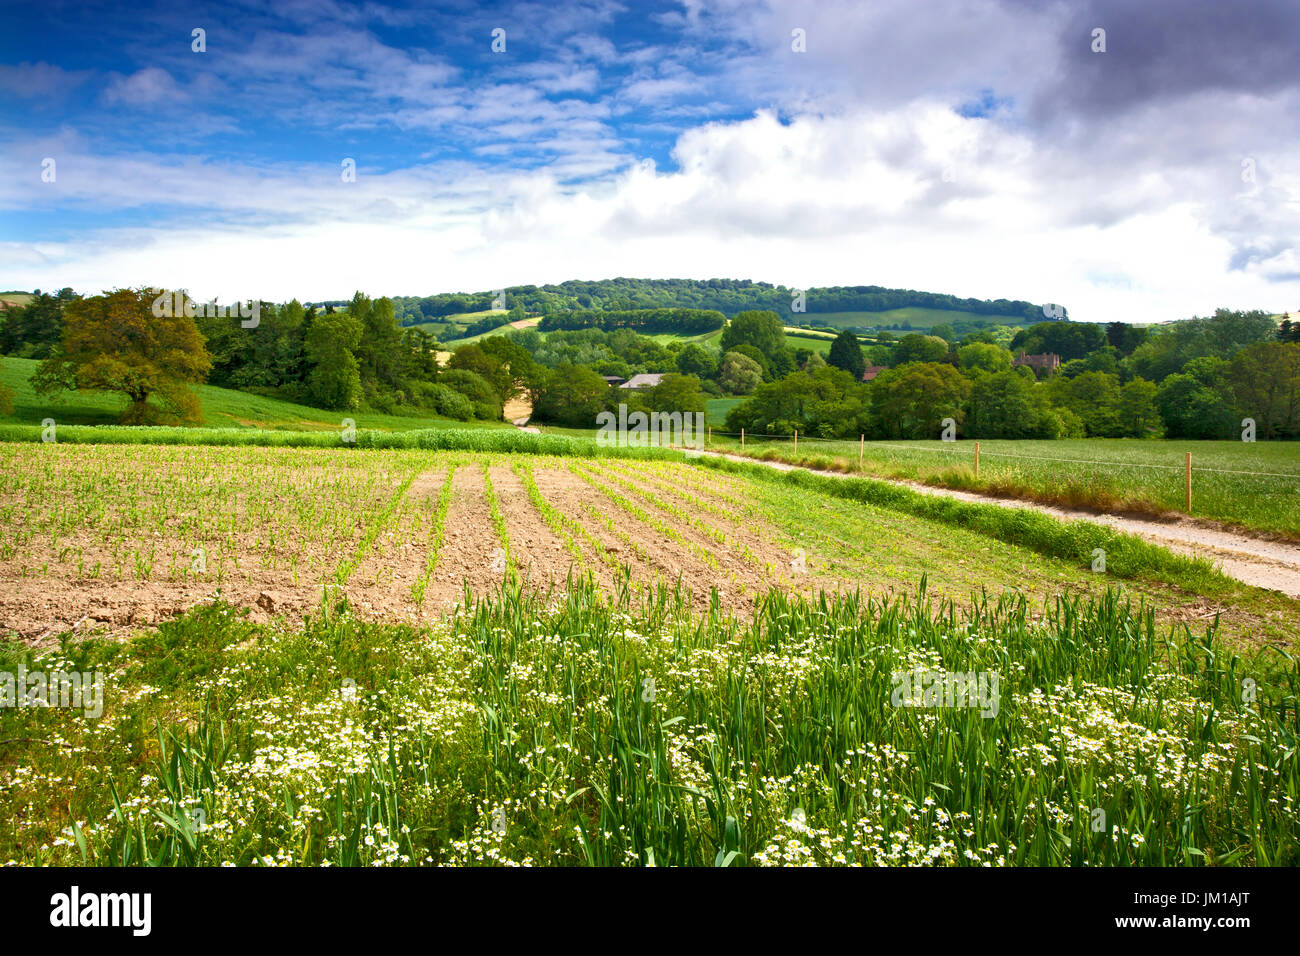 A summer view of a ploughed field in Dorset, England Stock Photo